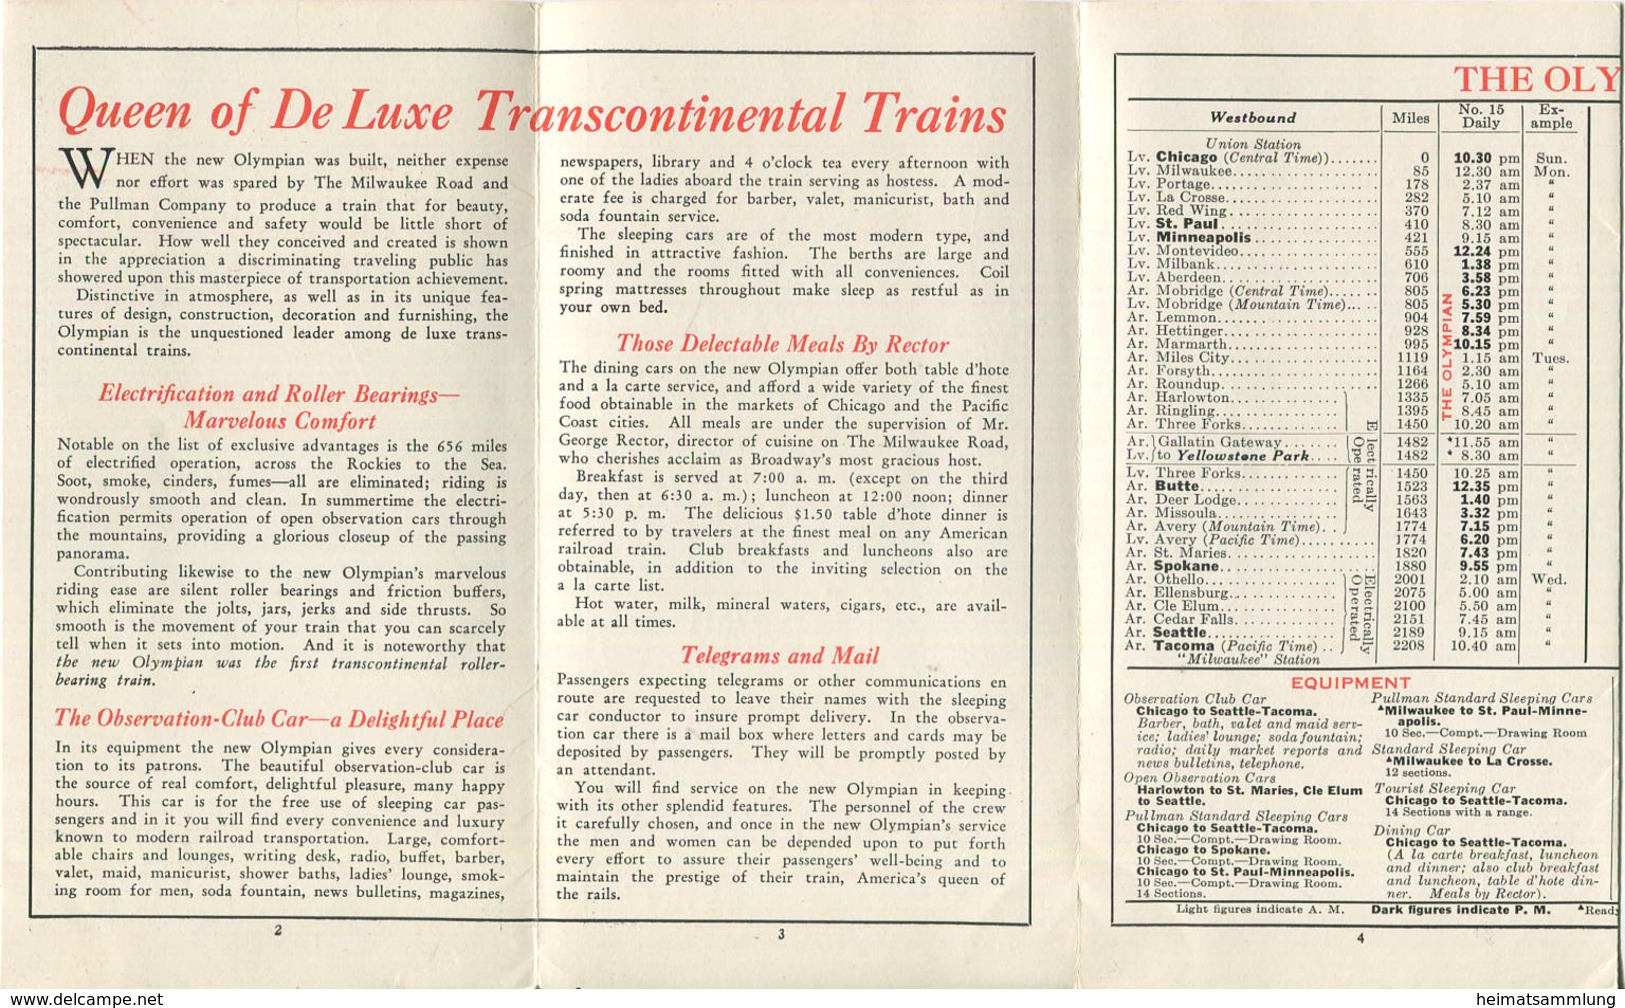 The Olympian 1930 - Queen Of De Luxe Transcontinental Trains - Fahrplan Between Cjicago And Seattle-Tacoma - Mondo